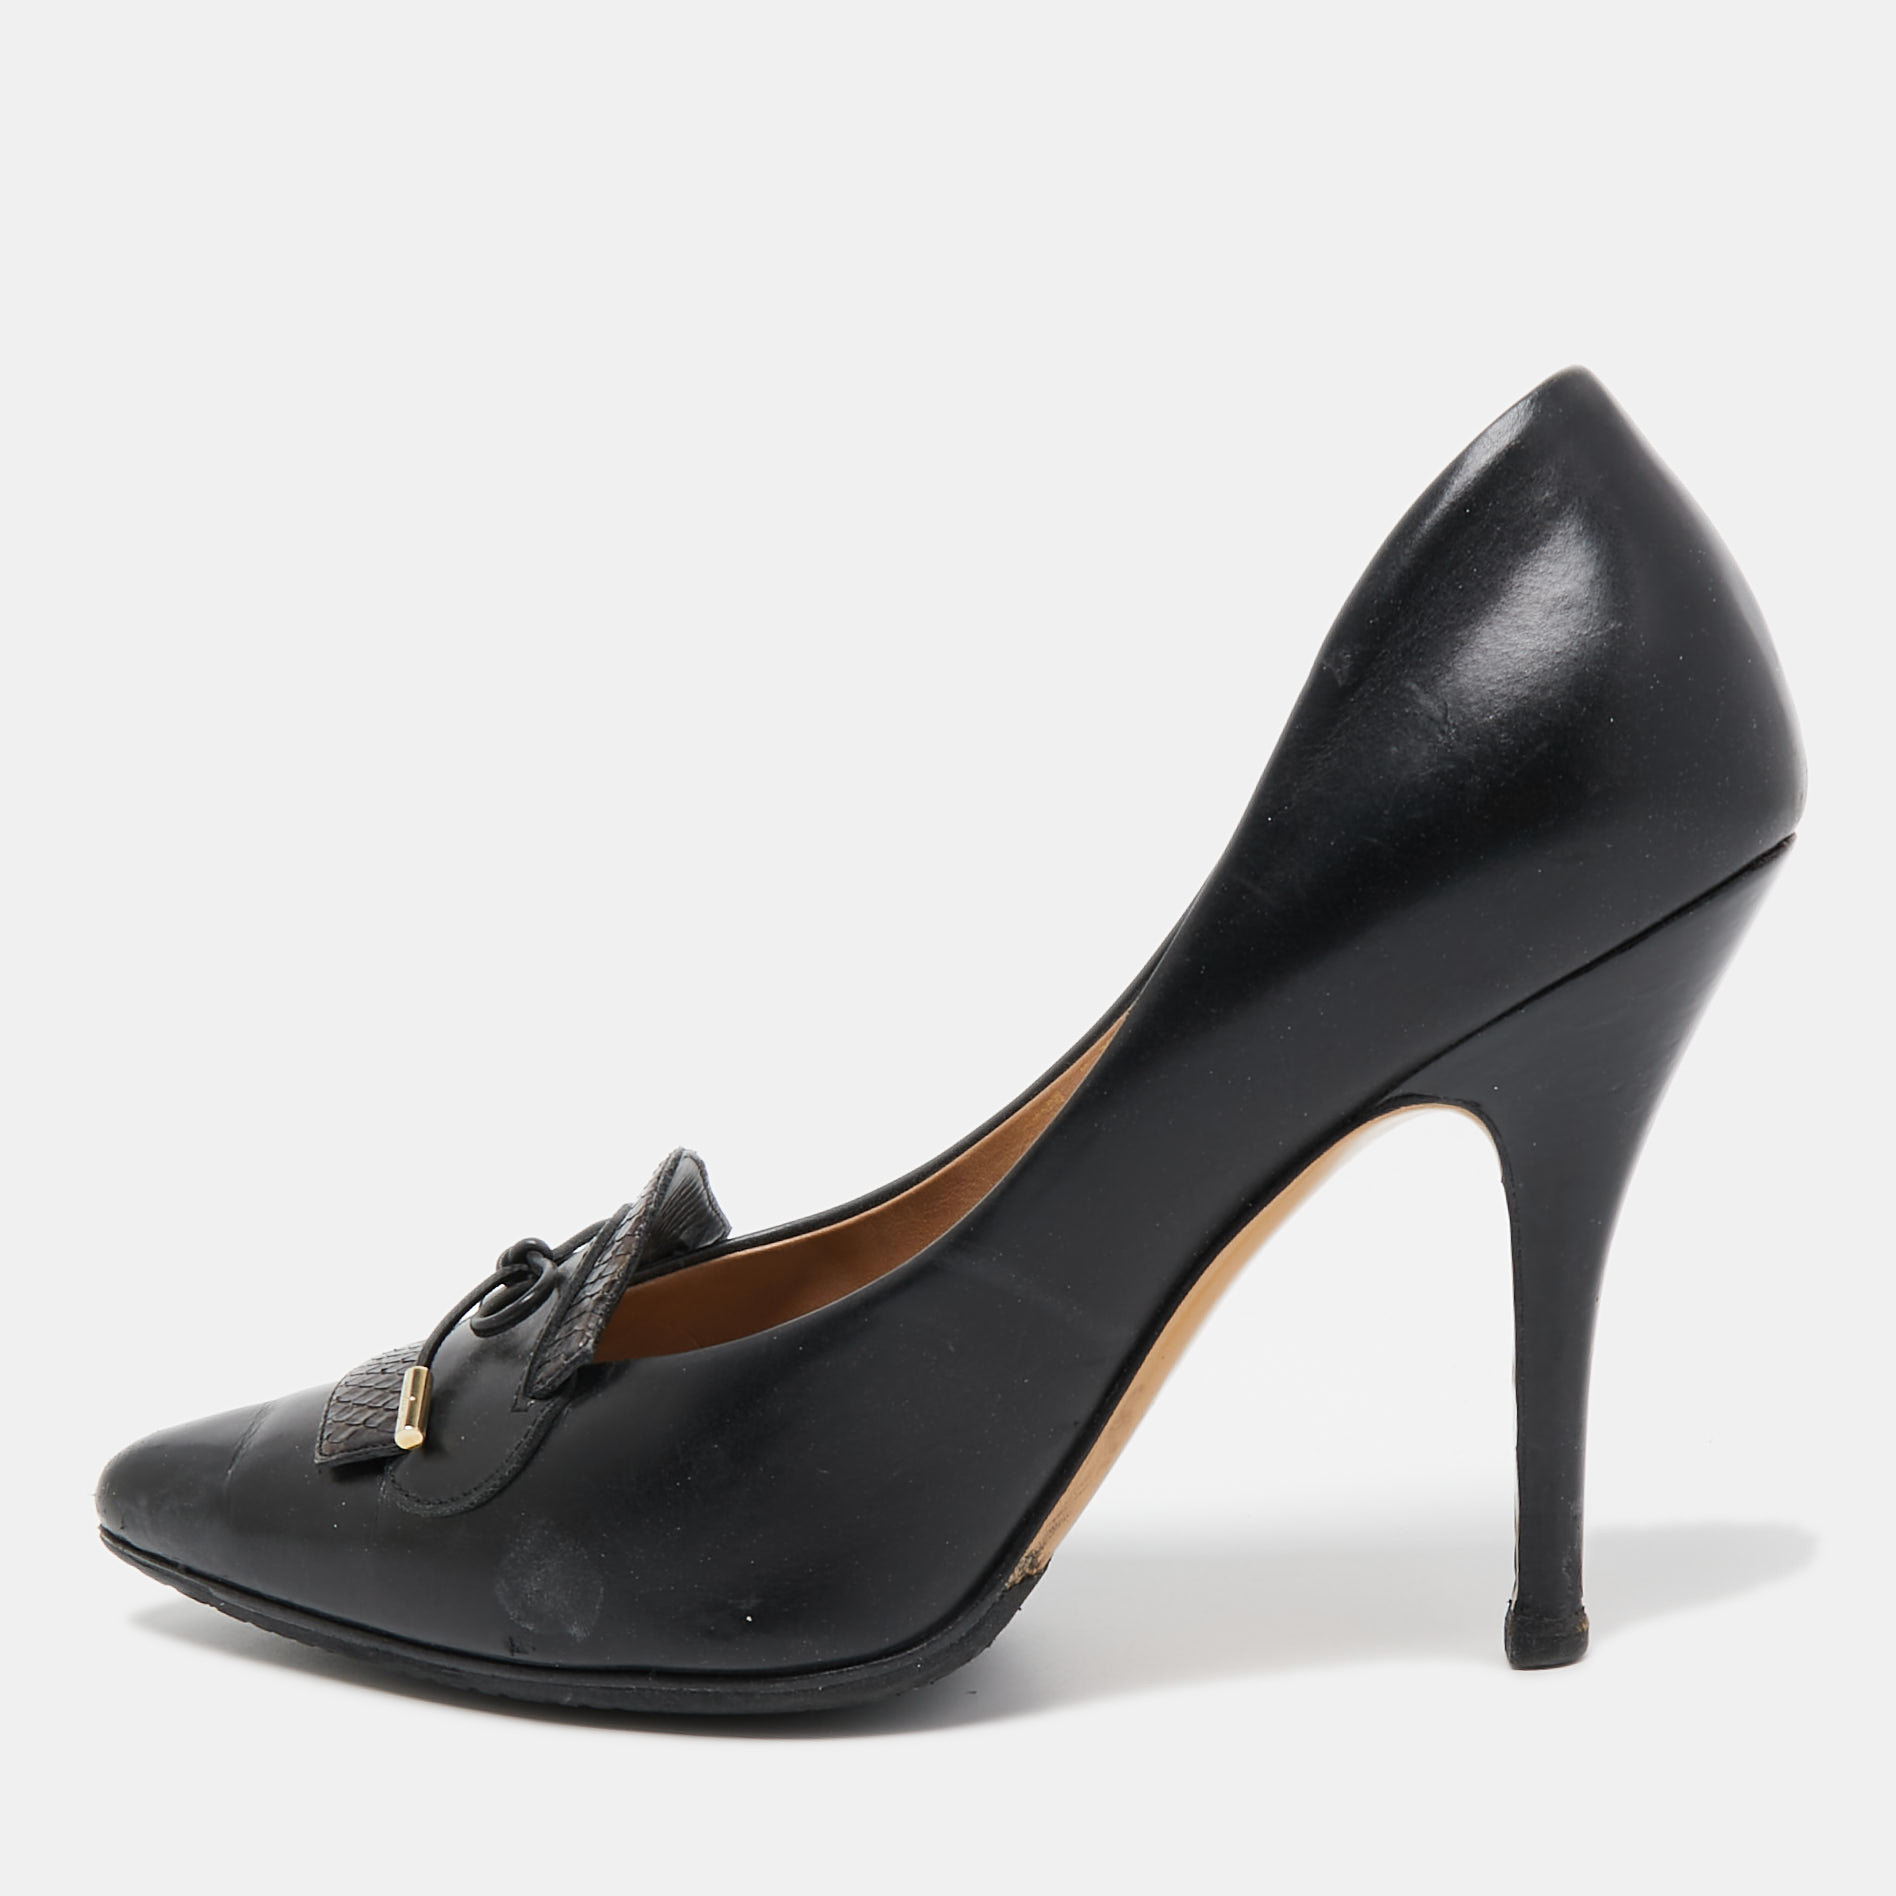 Cut into a timeless silhouette this pair of pumps is simple yet classy. With a classy shade it flaunts durable soles and comfortable footbeds.